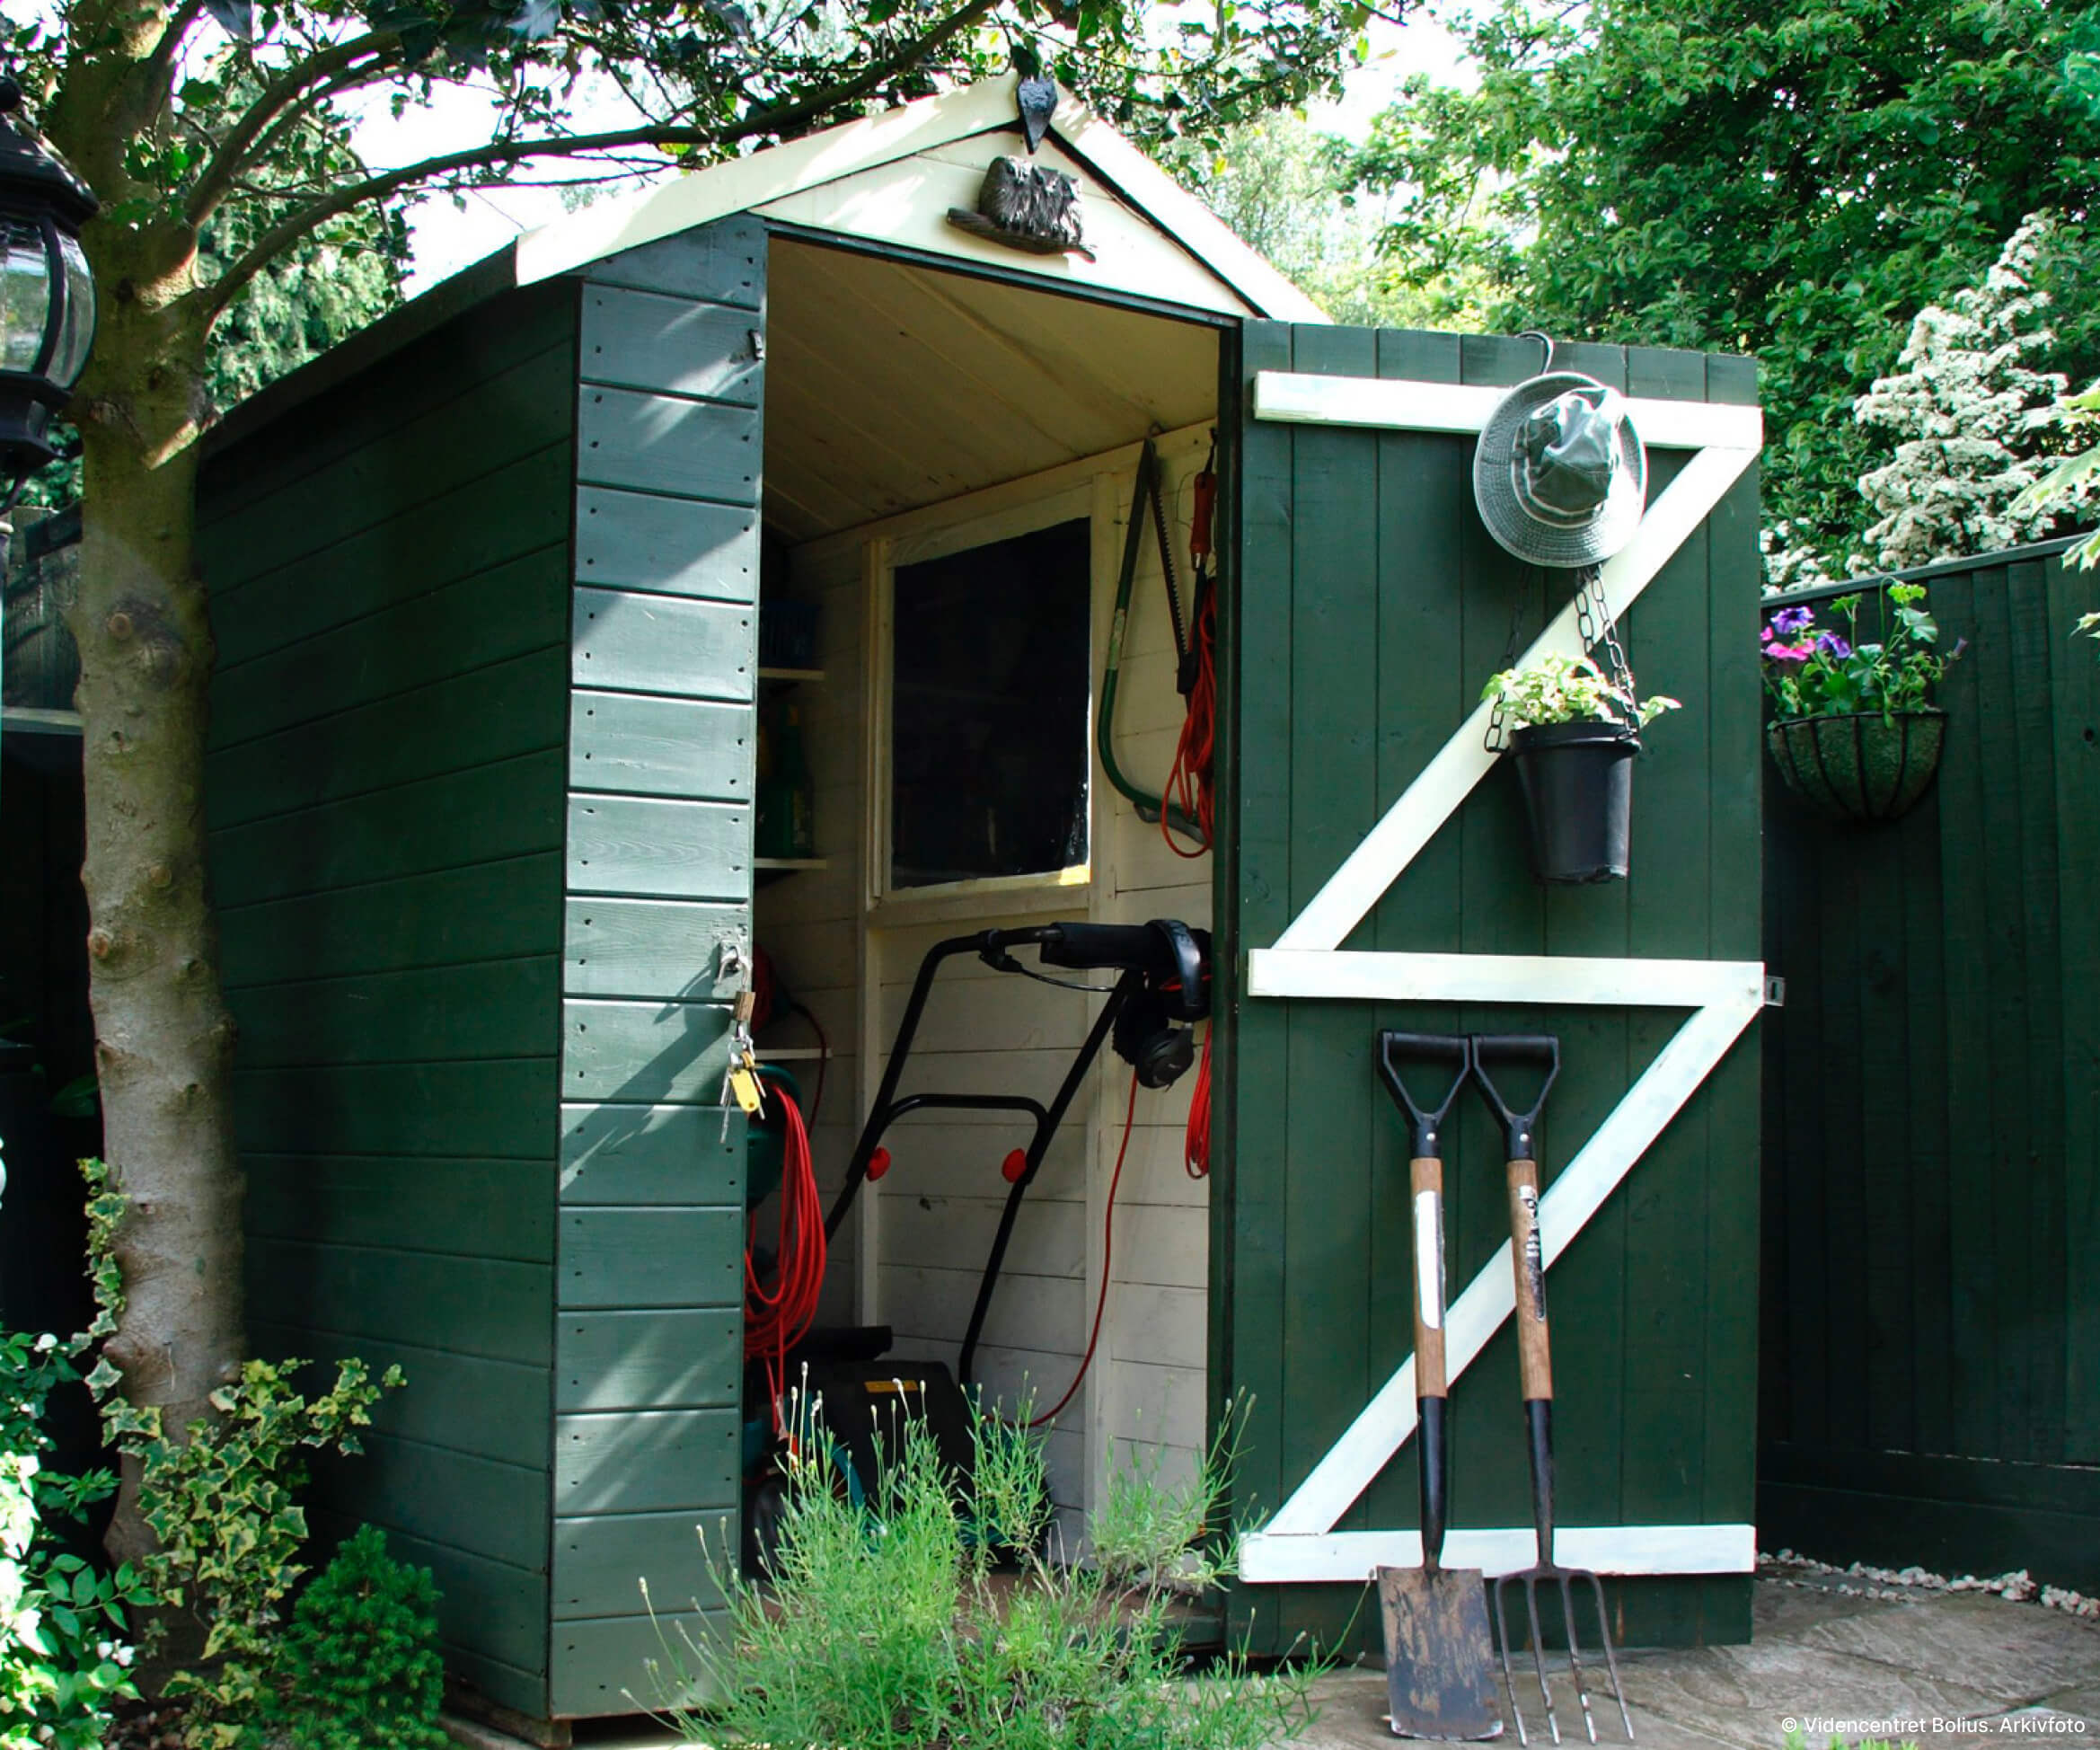 Or a shed in the garden